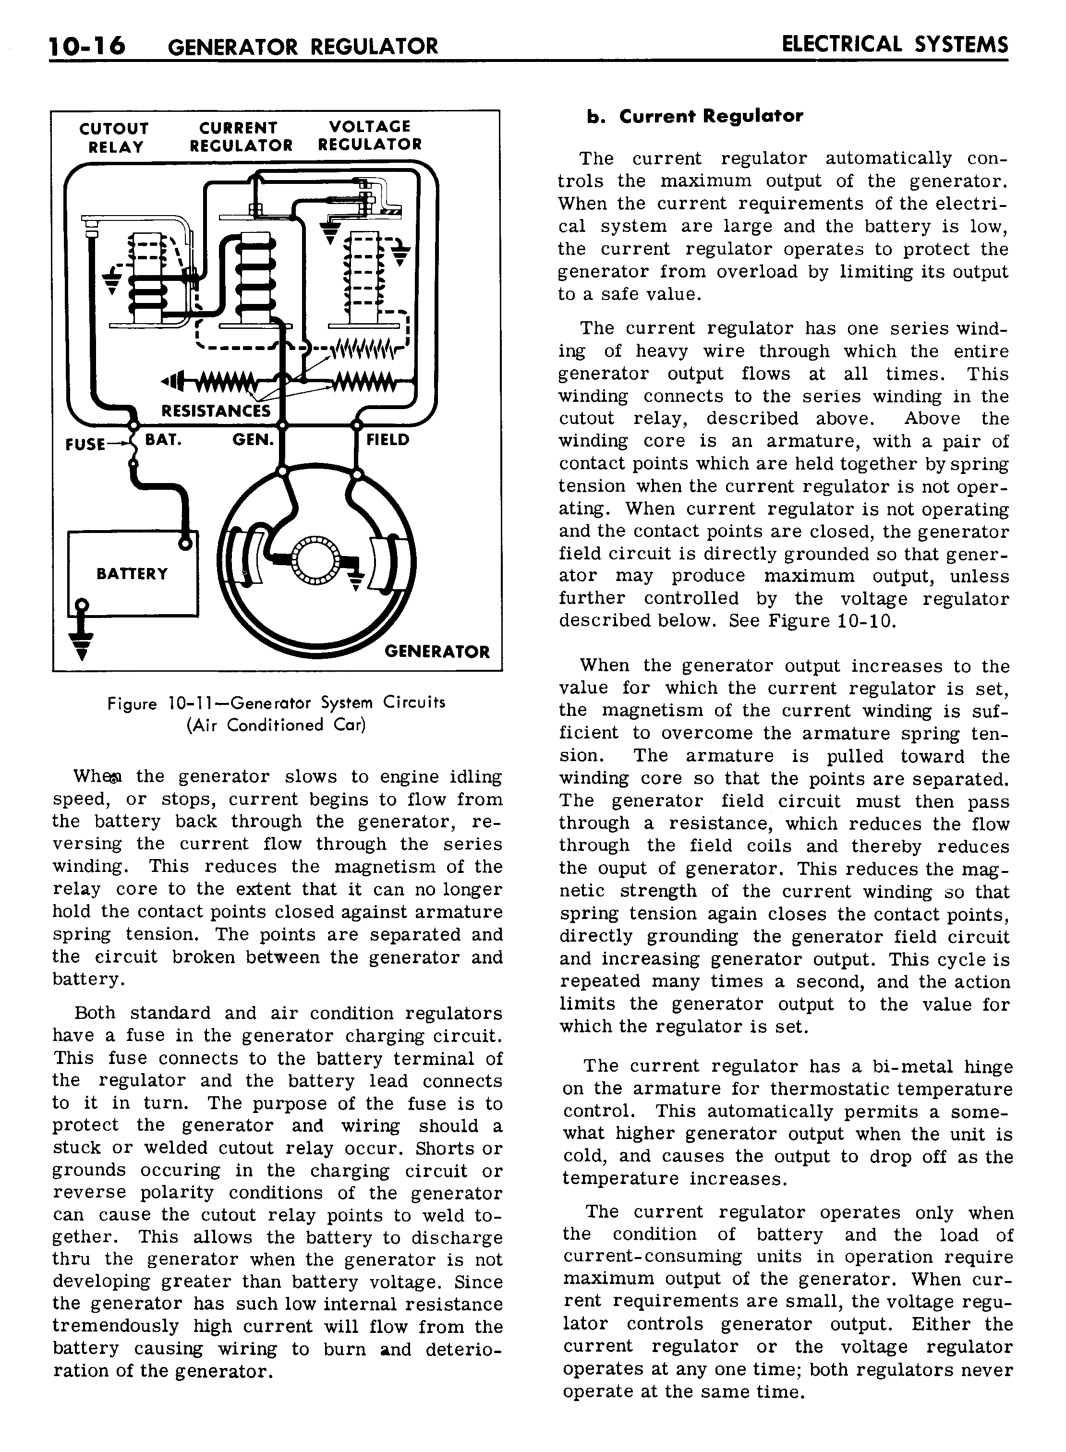 n_10 1961 Buick Shop Manual - Electrical Systems-016-016.jpg